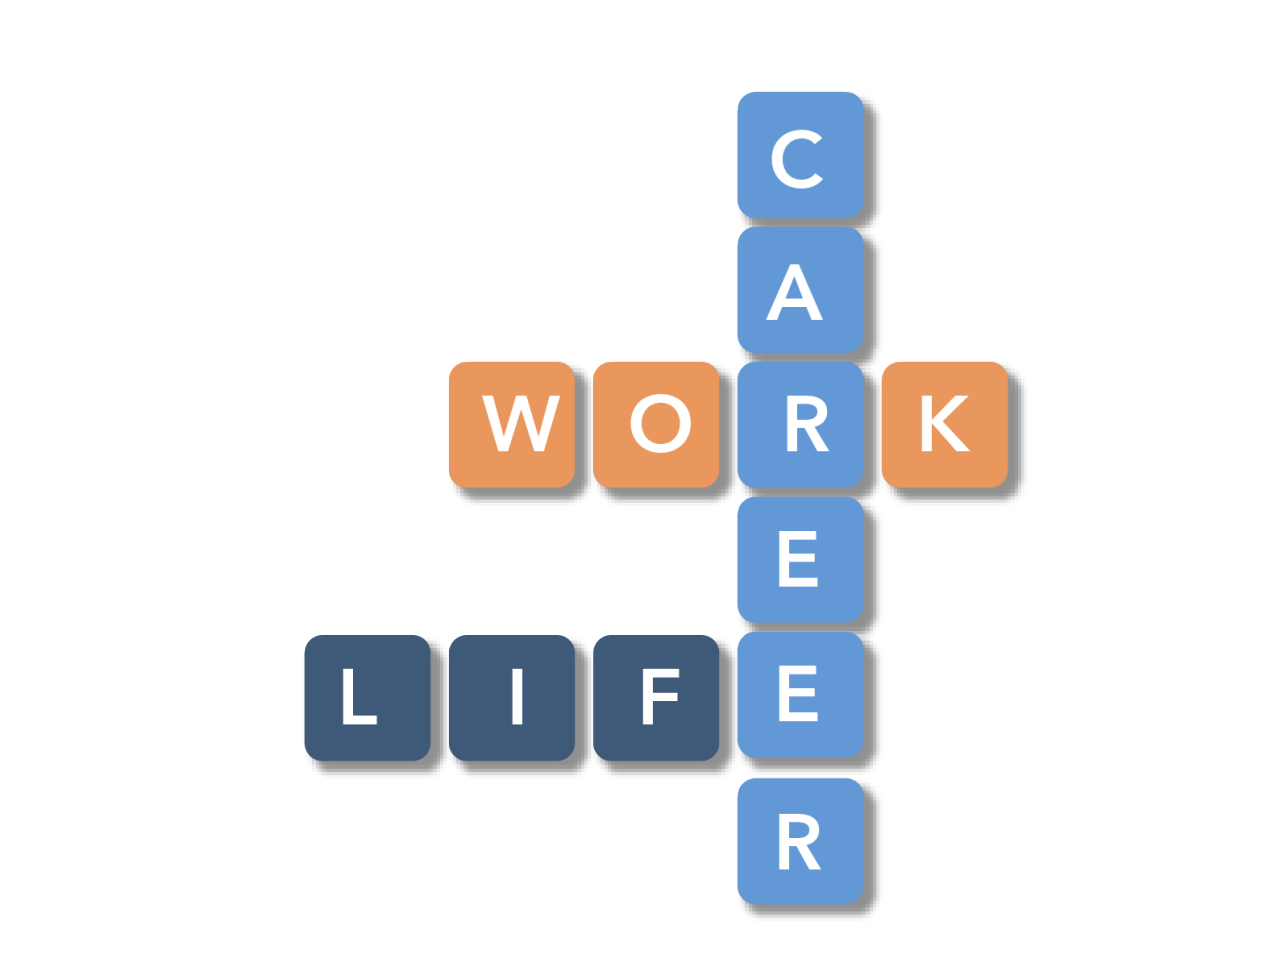 Image shows letter tiles displayed similar to a crossword consisting of words 'work, life and career' to represent a work and life balance is needed for a successful career. There is a vertical column with the word 'career' in white text on royal blue tiles. There is a horizontal row with the word 'work' in white text on orange tiles intersecting the word 'career' at the first r. There is a horizontal row with the word 'life' in white text on dark blue tiles intersecting the word 'career' at the second e. Where the horizontal rows intersect the word 'career' at r and e those tiles take the original format of the word career.